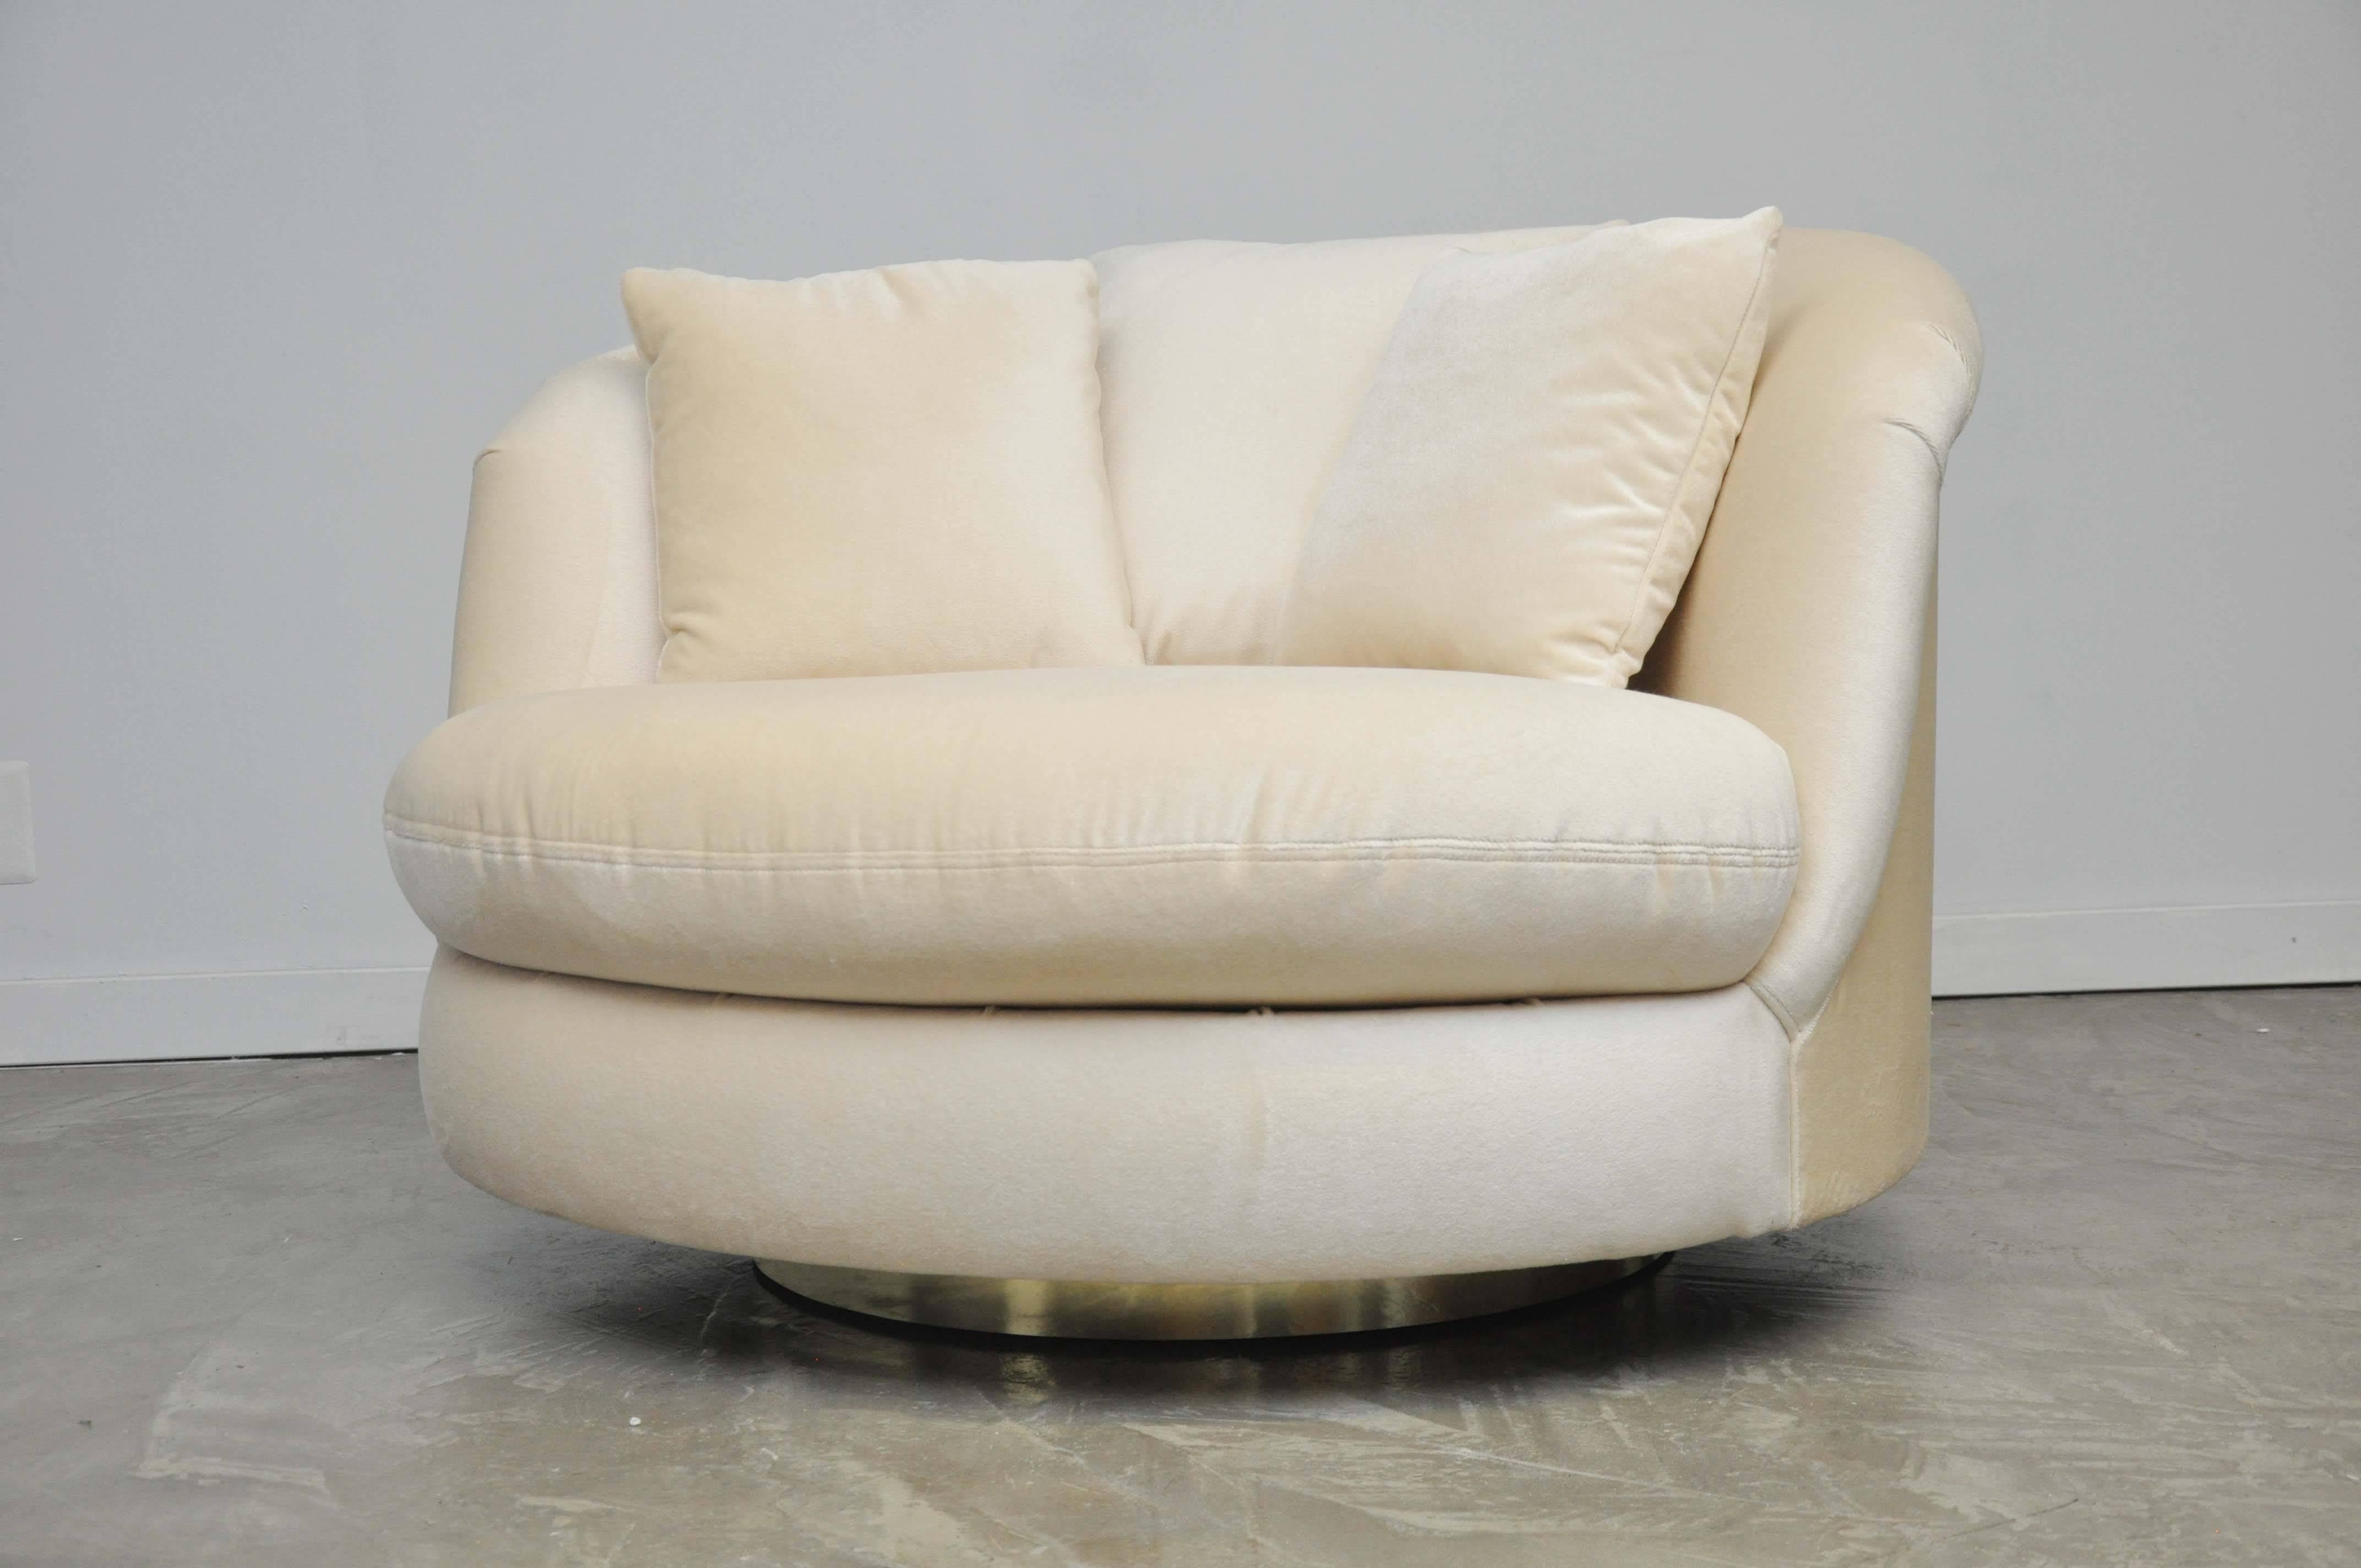 Large-scale swivel chair by Milo Baughman. Fully restored. New mohair upholstery over polished brass swivel base.